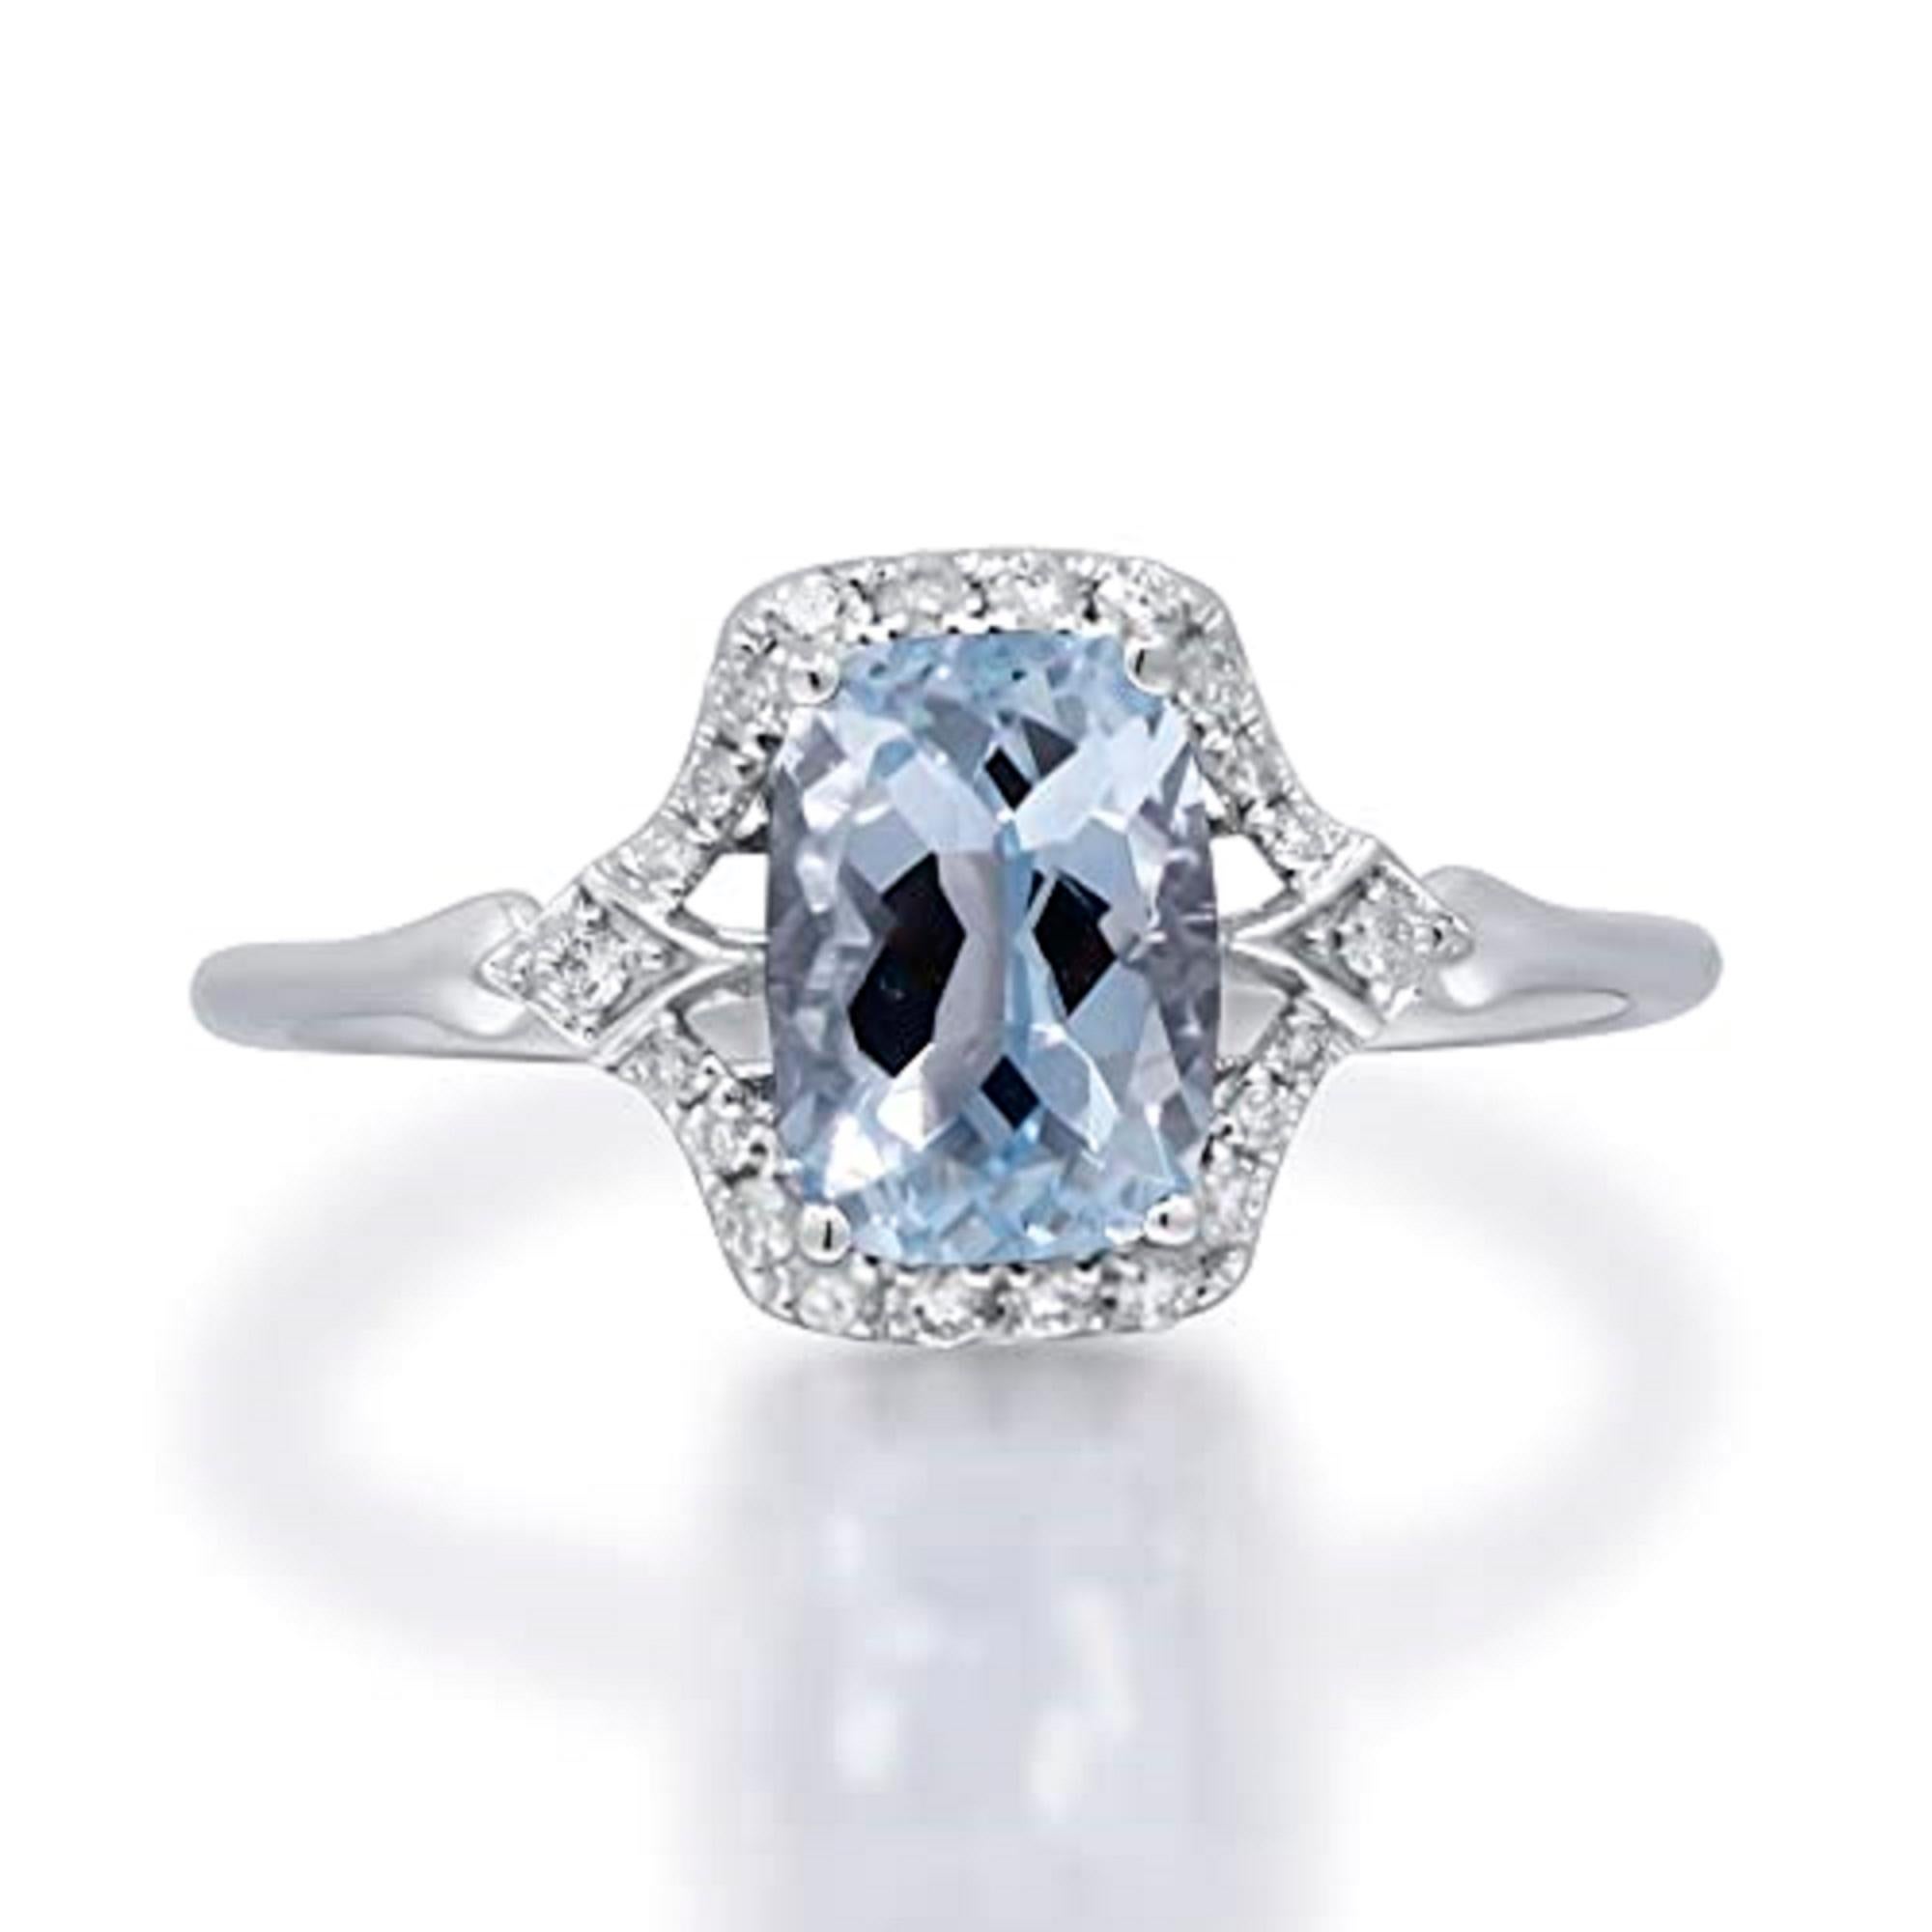 Decorate yourself in elegance with this Ring is crafted from 14-karat white Gold by Gin & Grace. This Ring is made up of 6x8 mm Cushion-Cut Aquamarine (1 pcs) 1.25 carat and Round-cut White Diamond (22 Pcs) 0.13 Carat. This Ring is weight 1.78